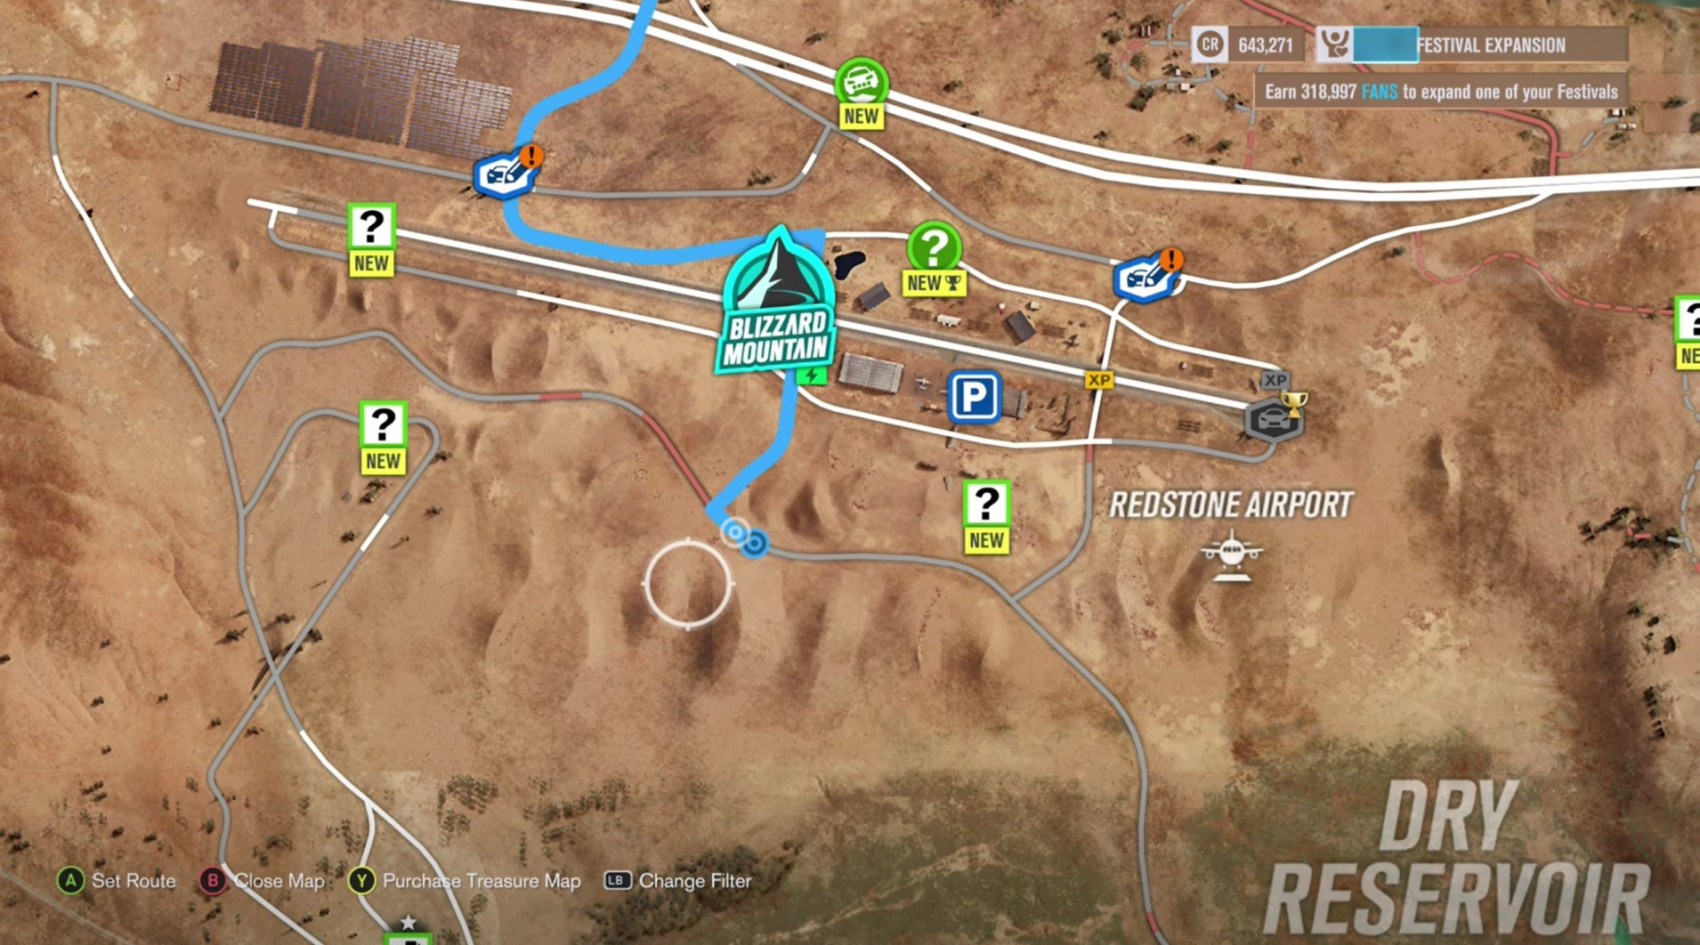 Here's where to go for Ultimate Air Skills in Forza Horizon 3.